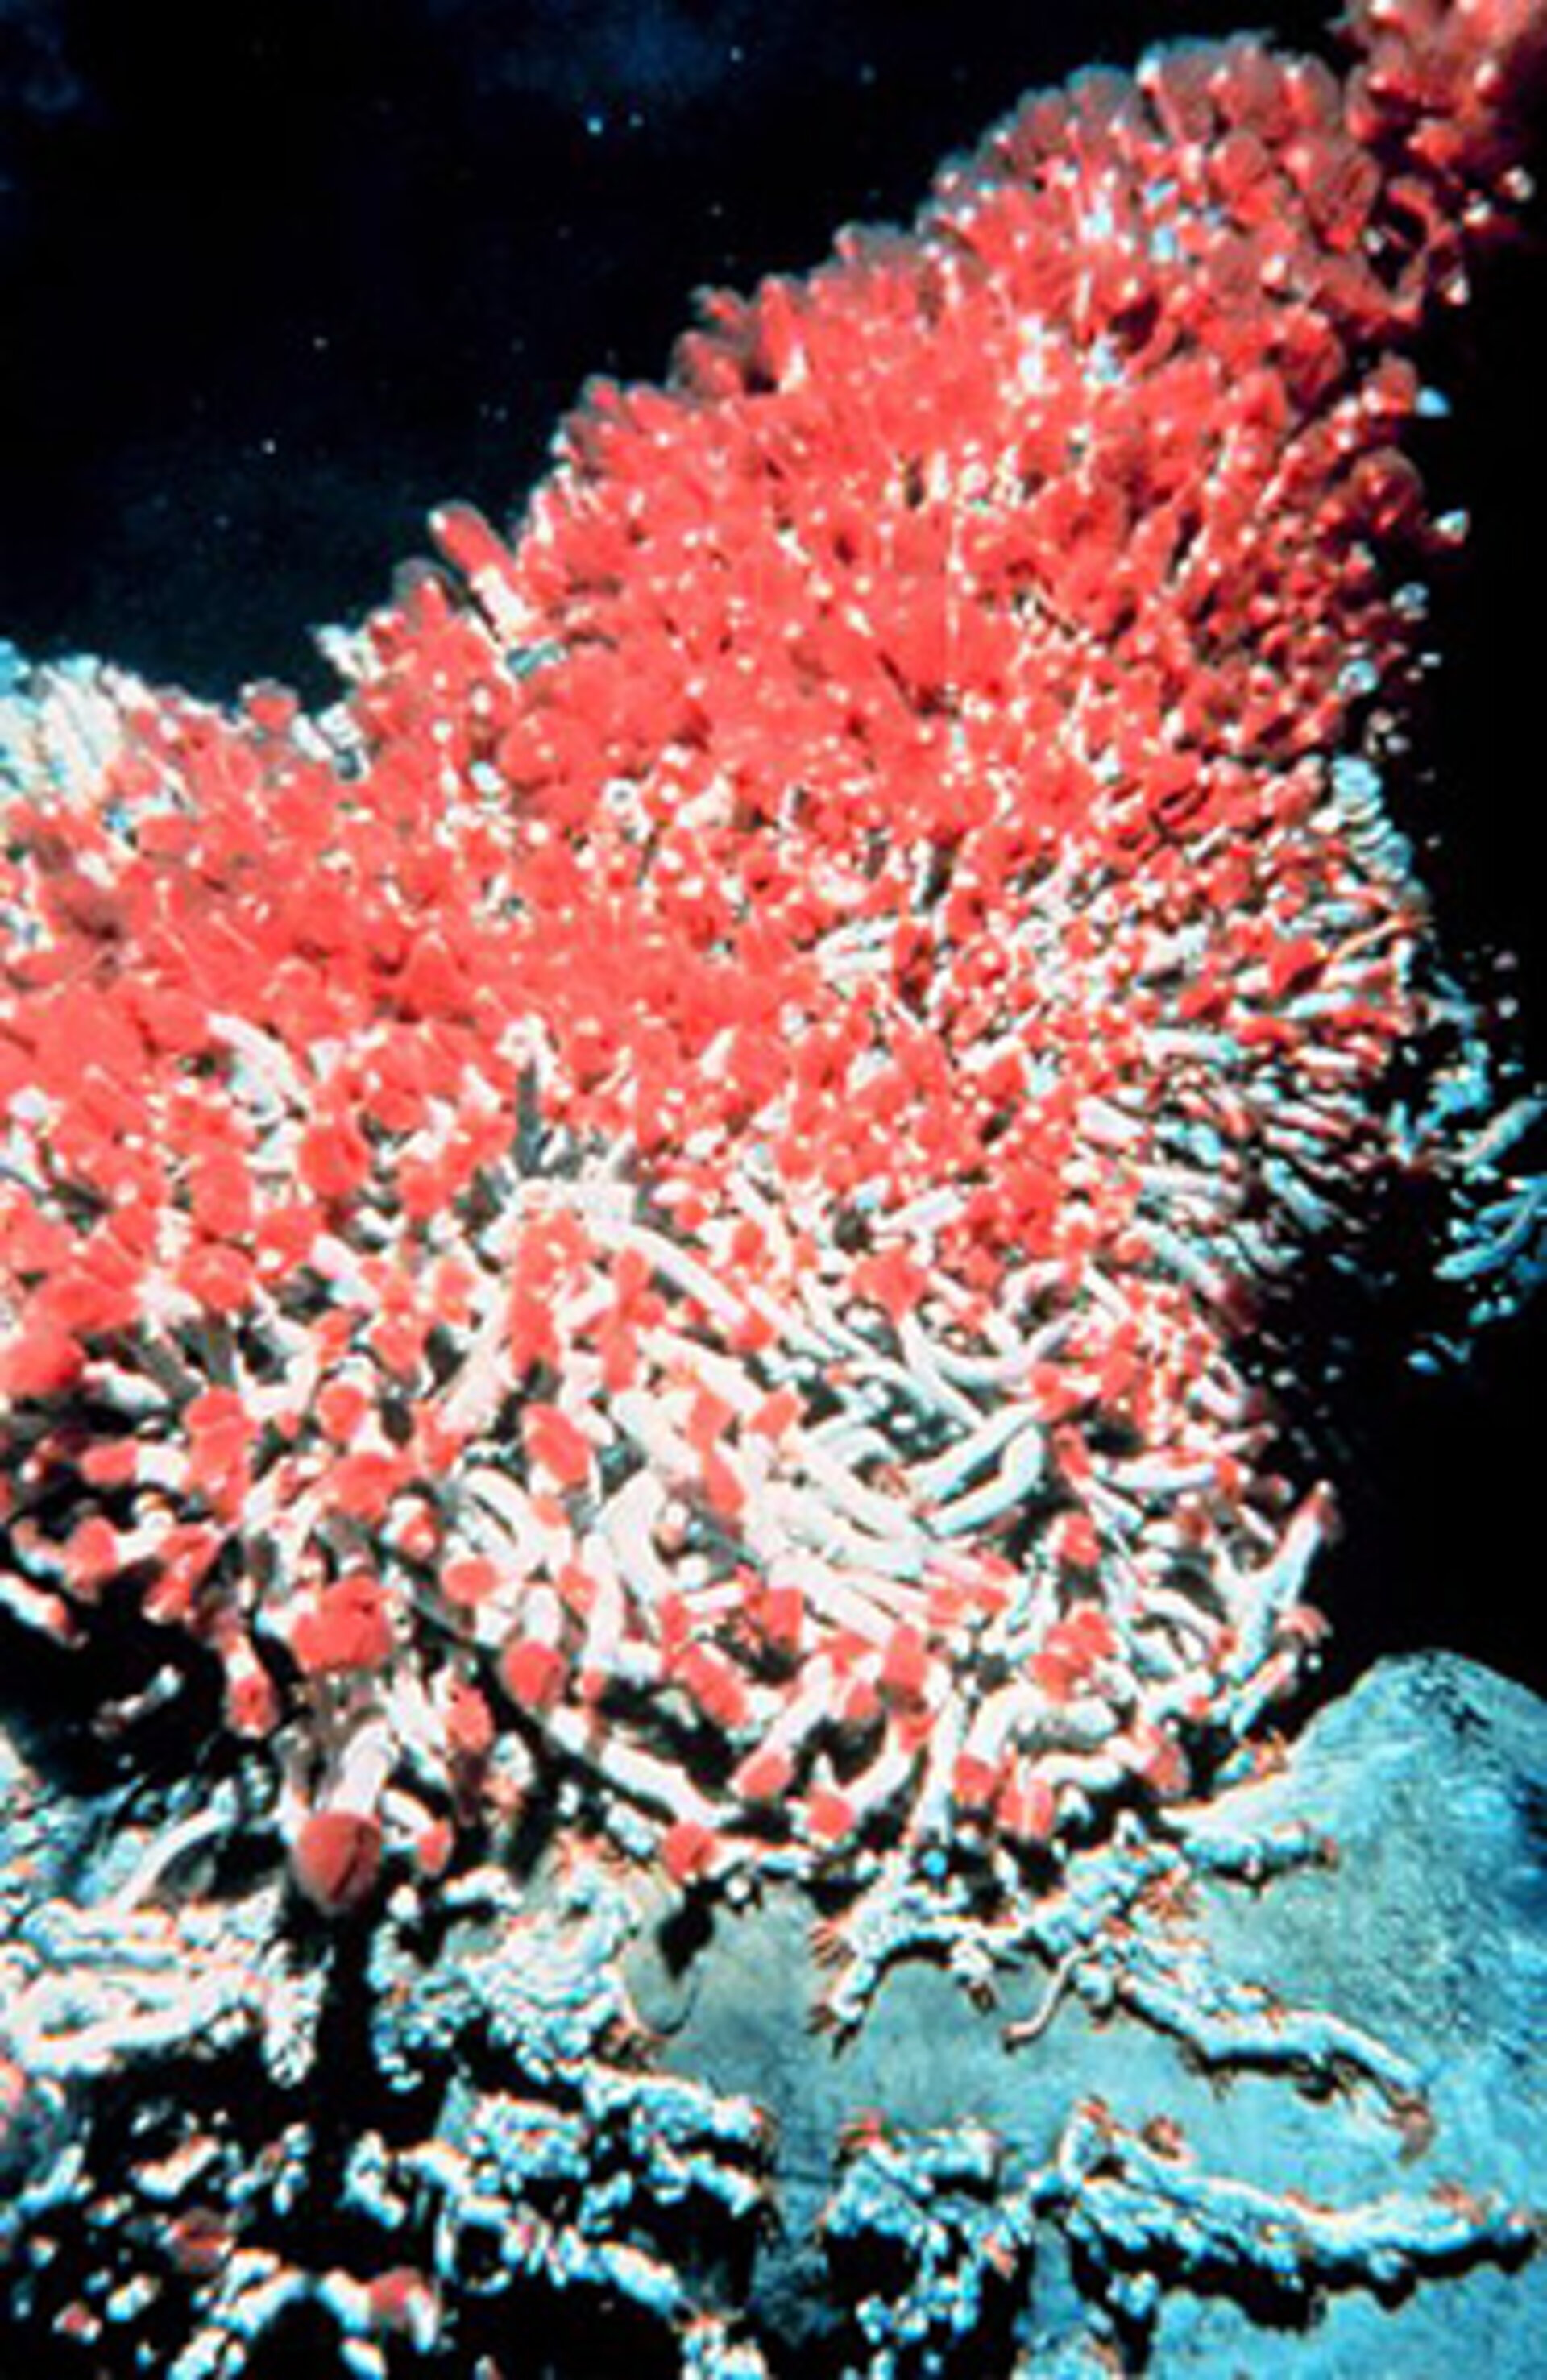 Tube worms feeding at the base of a black smoker